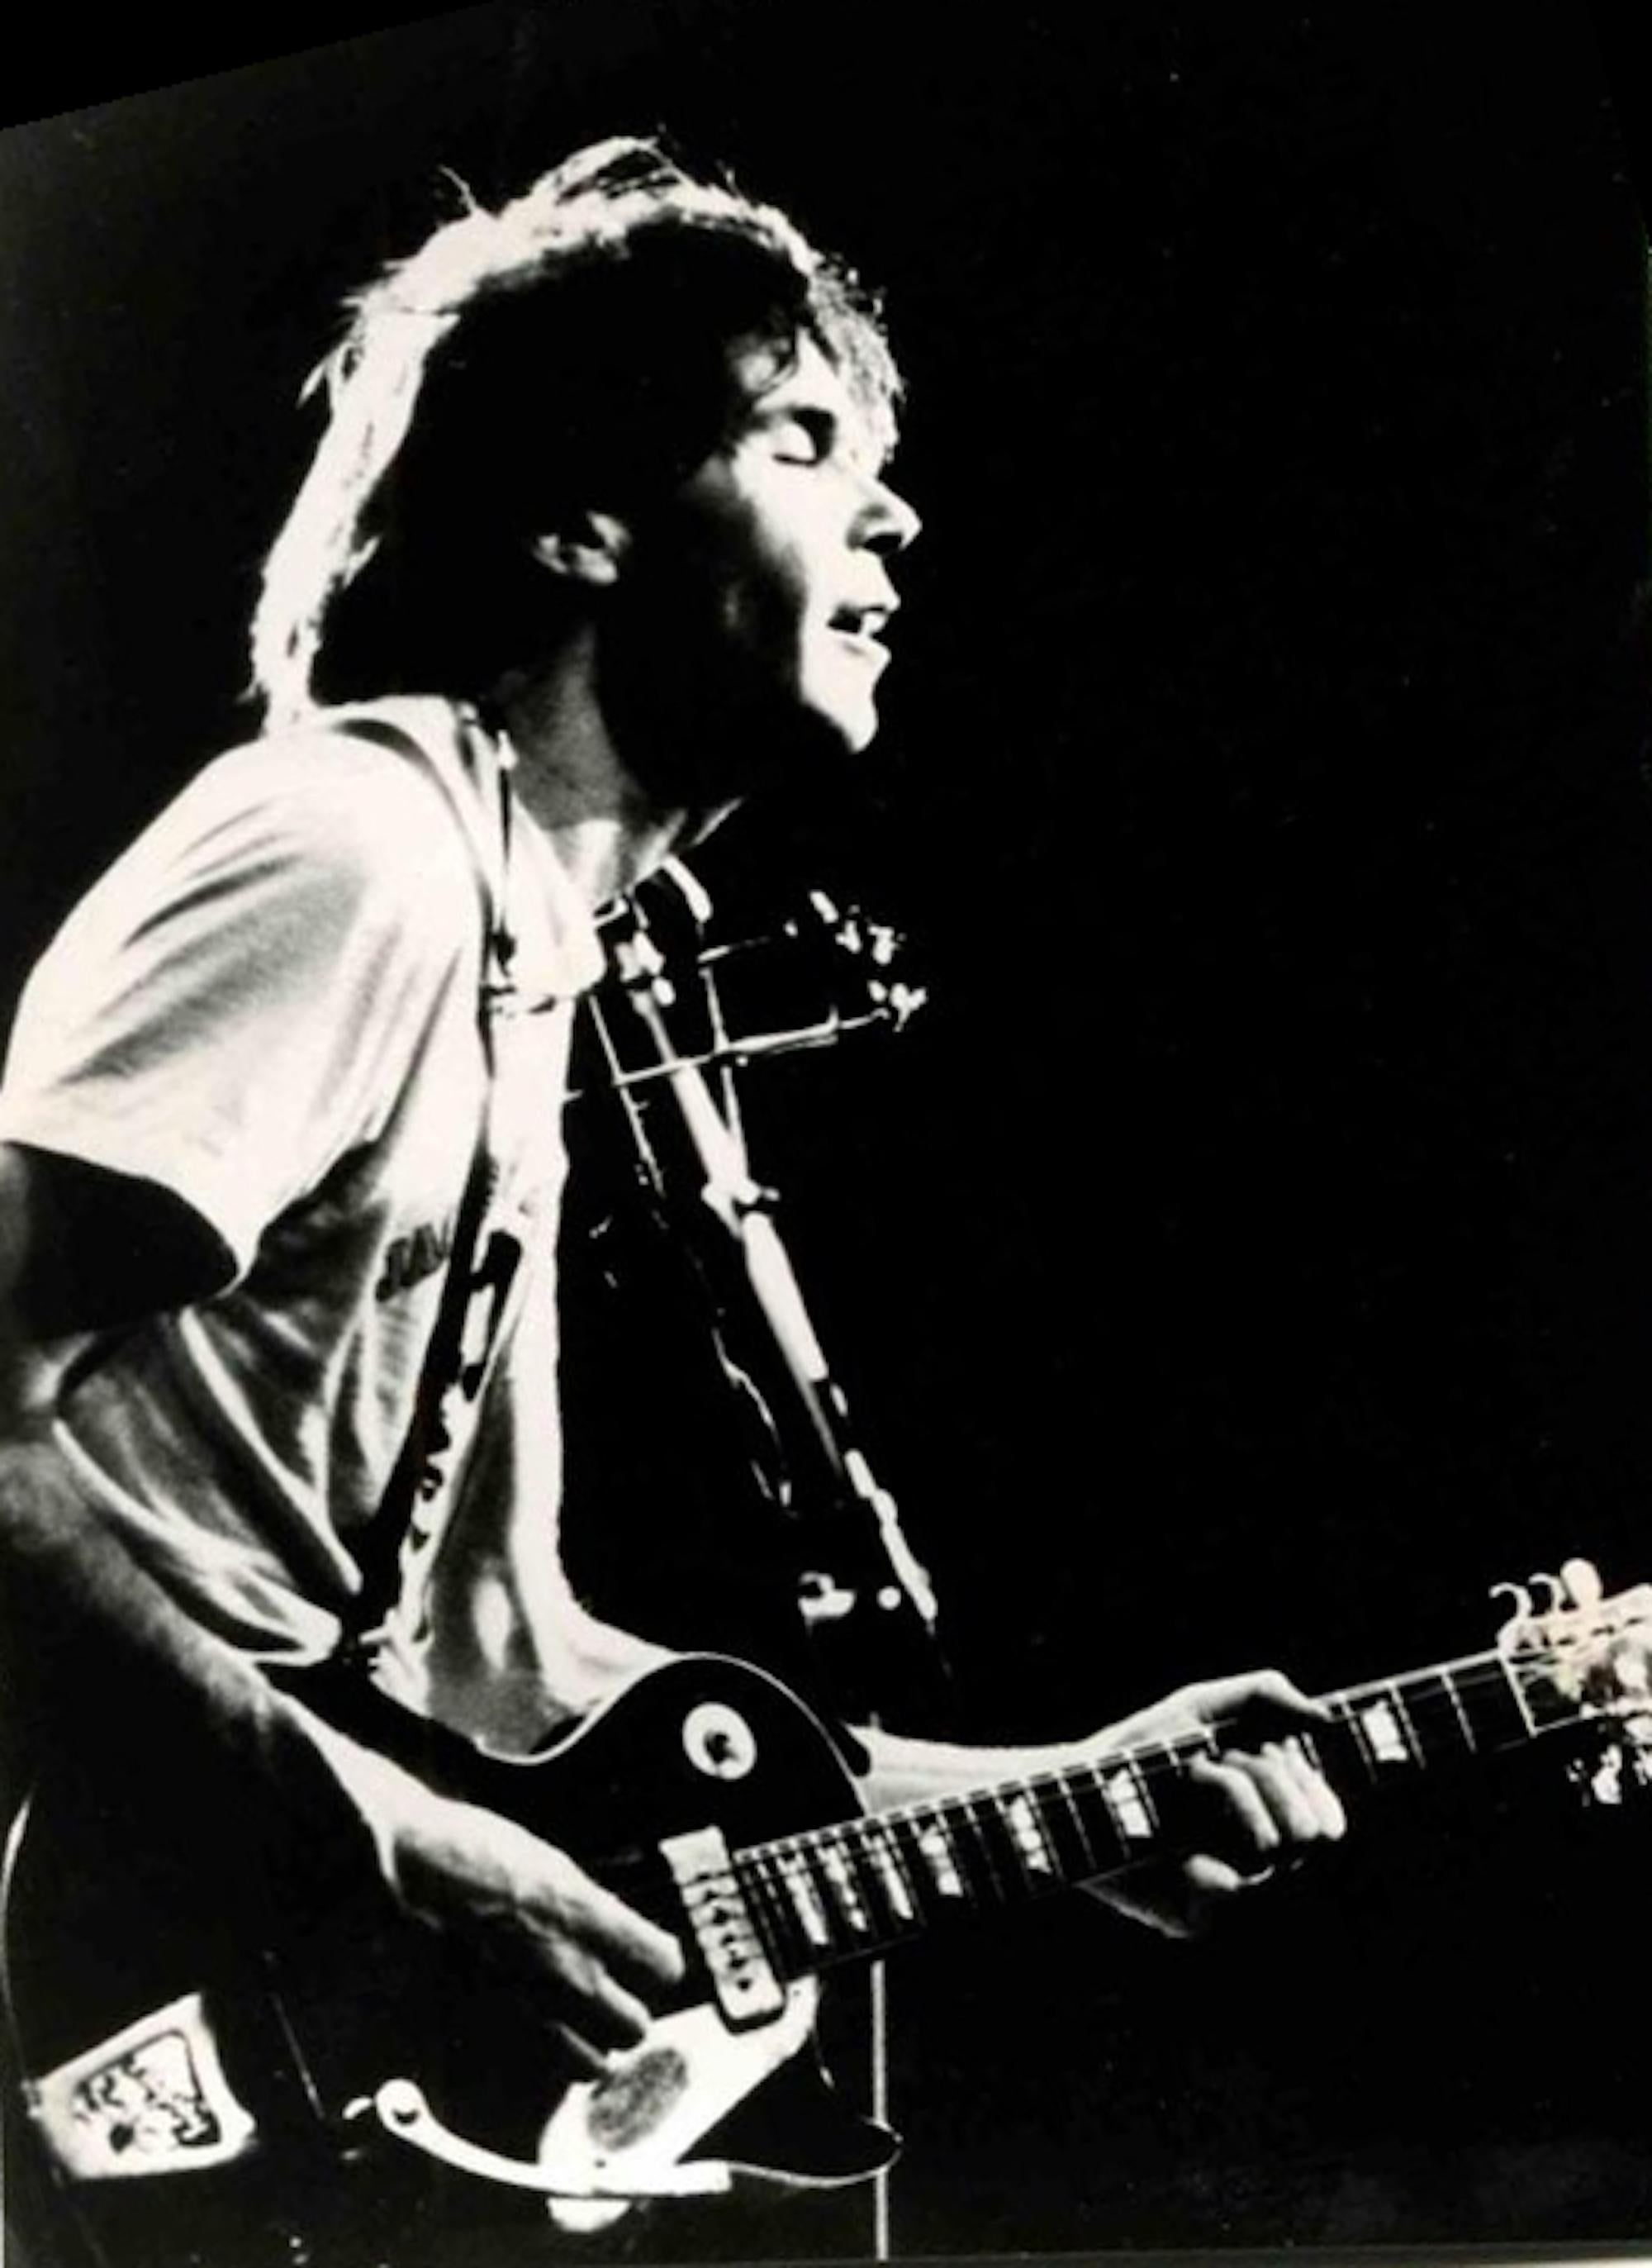 Unknown Figurative Photograph - Neil Young in Concert - Photo - 1980s